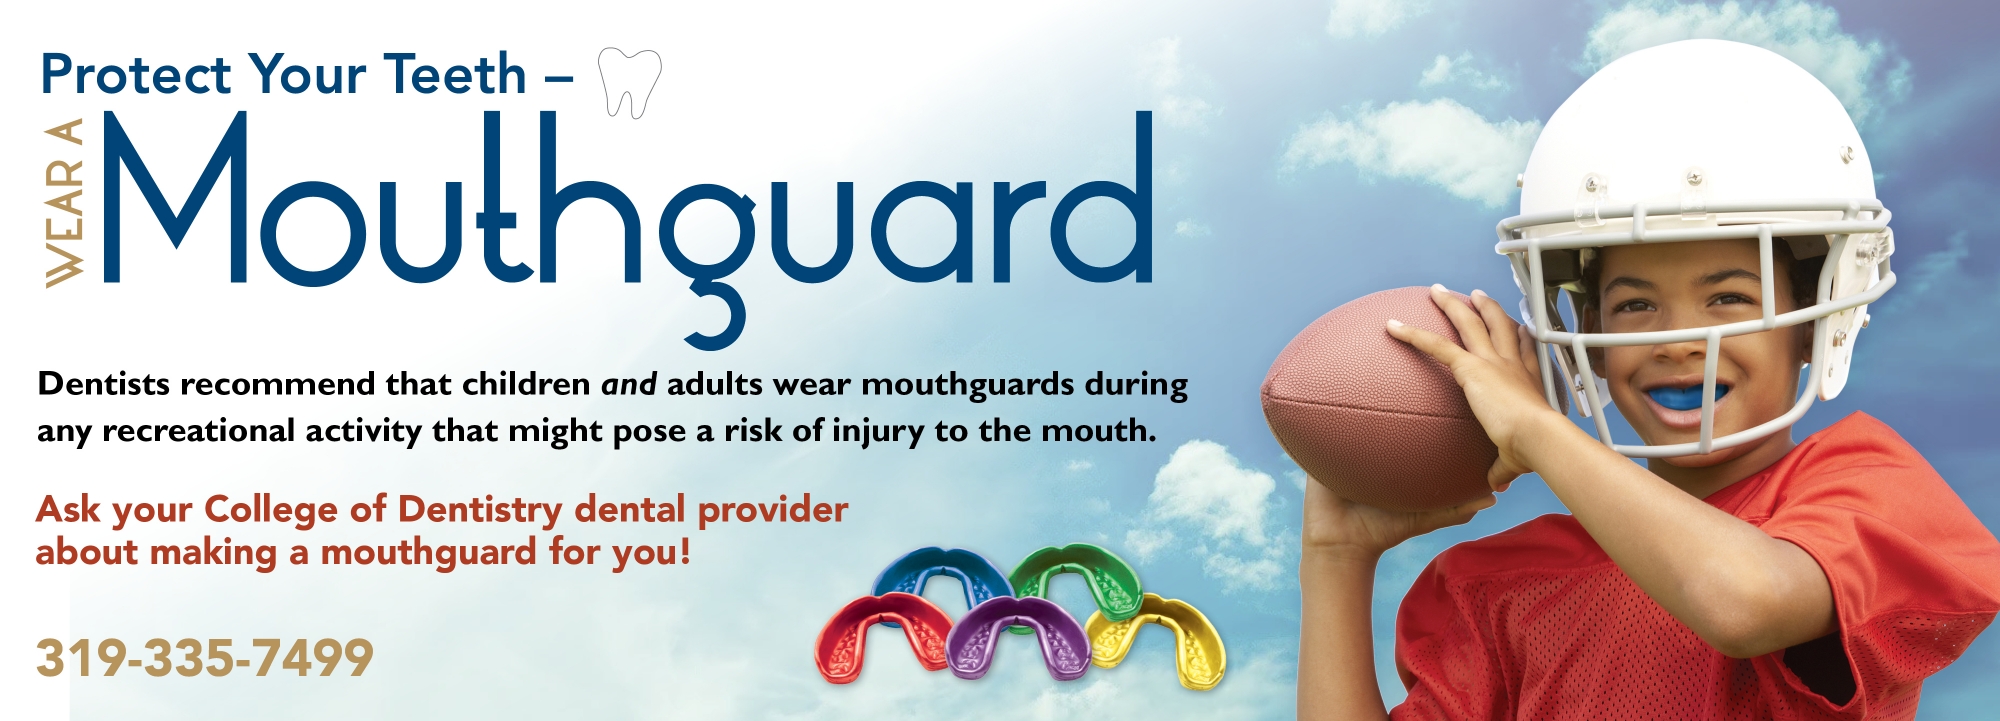 mouthguards and football safety